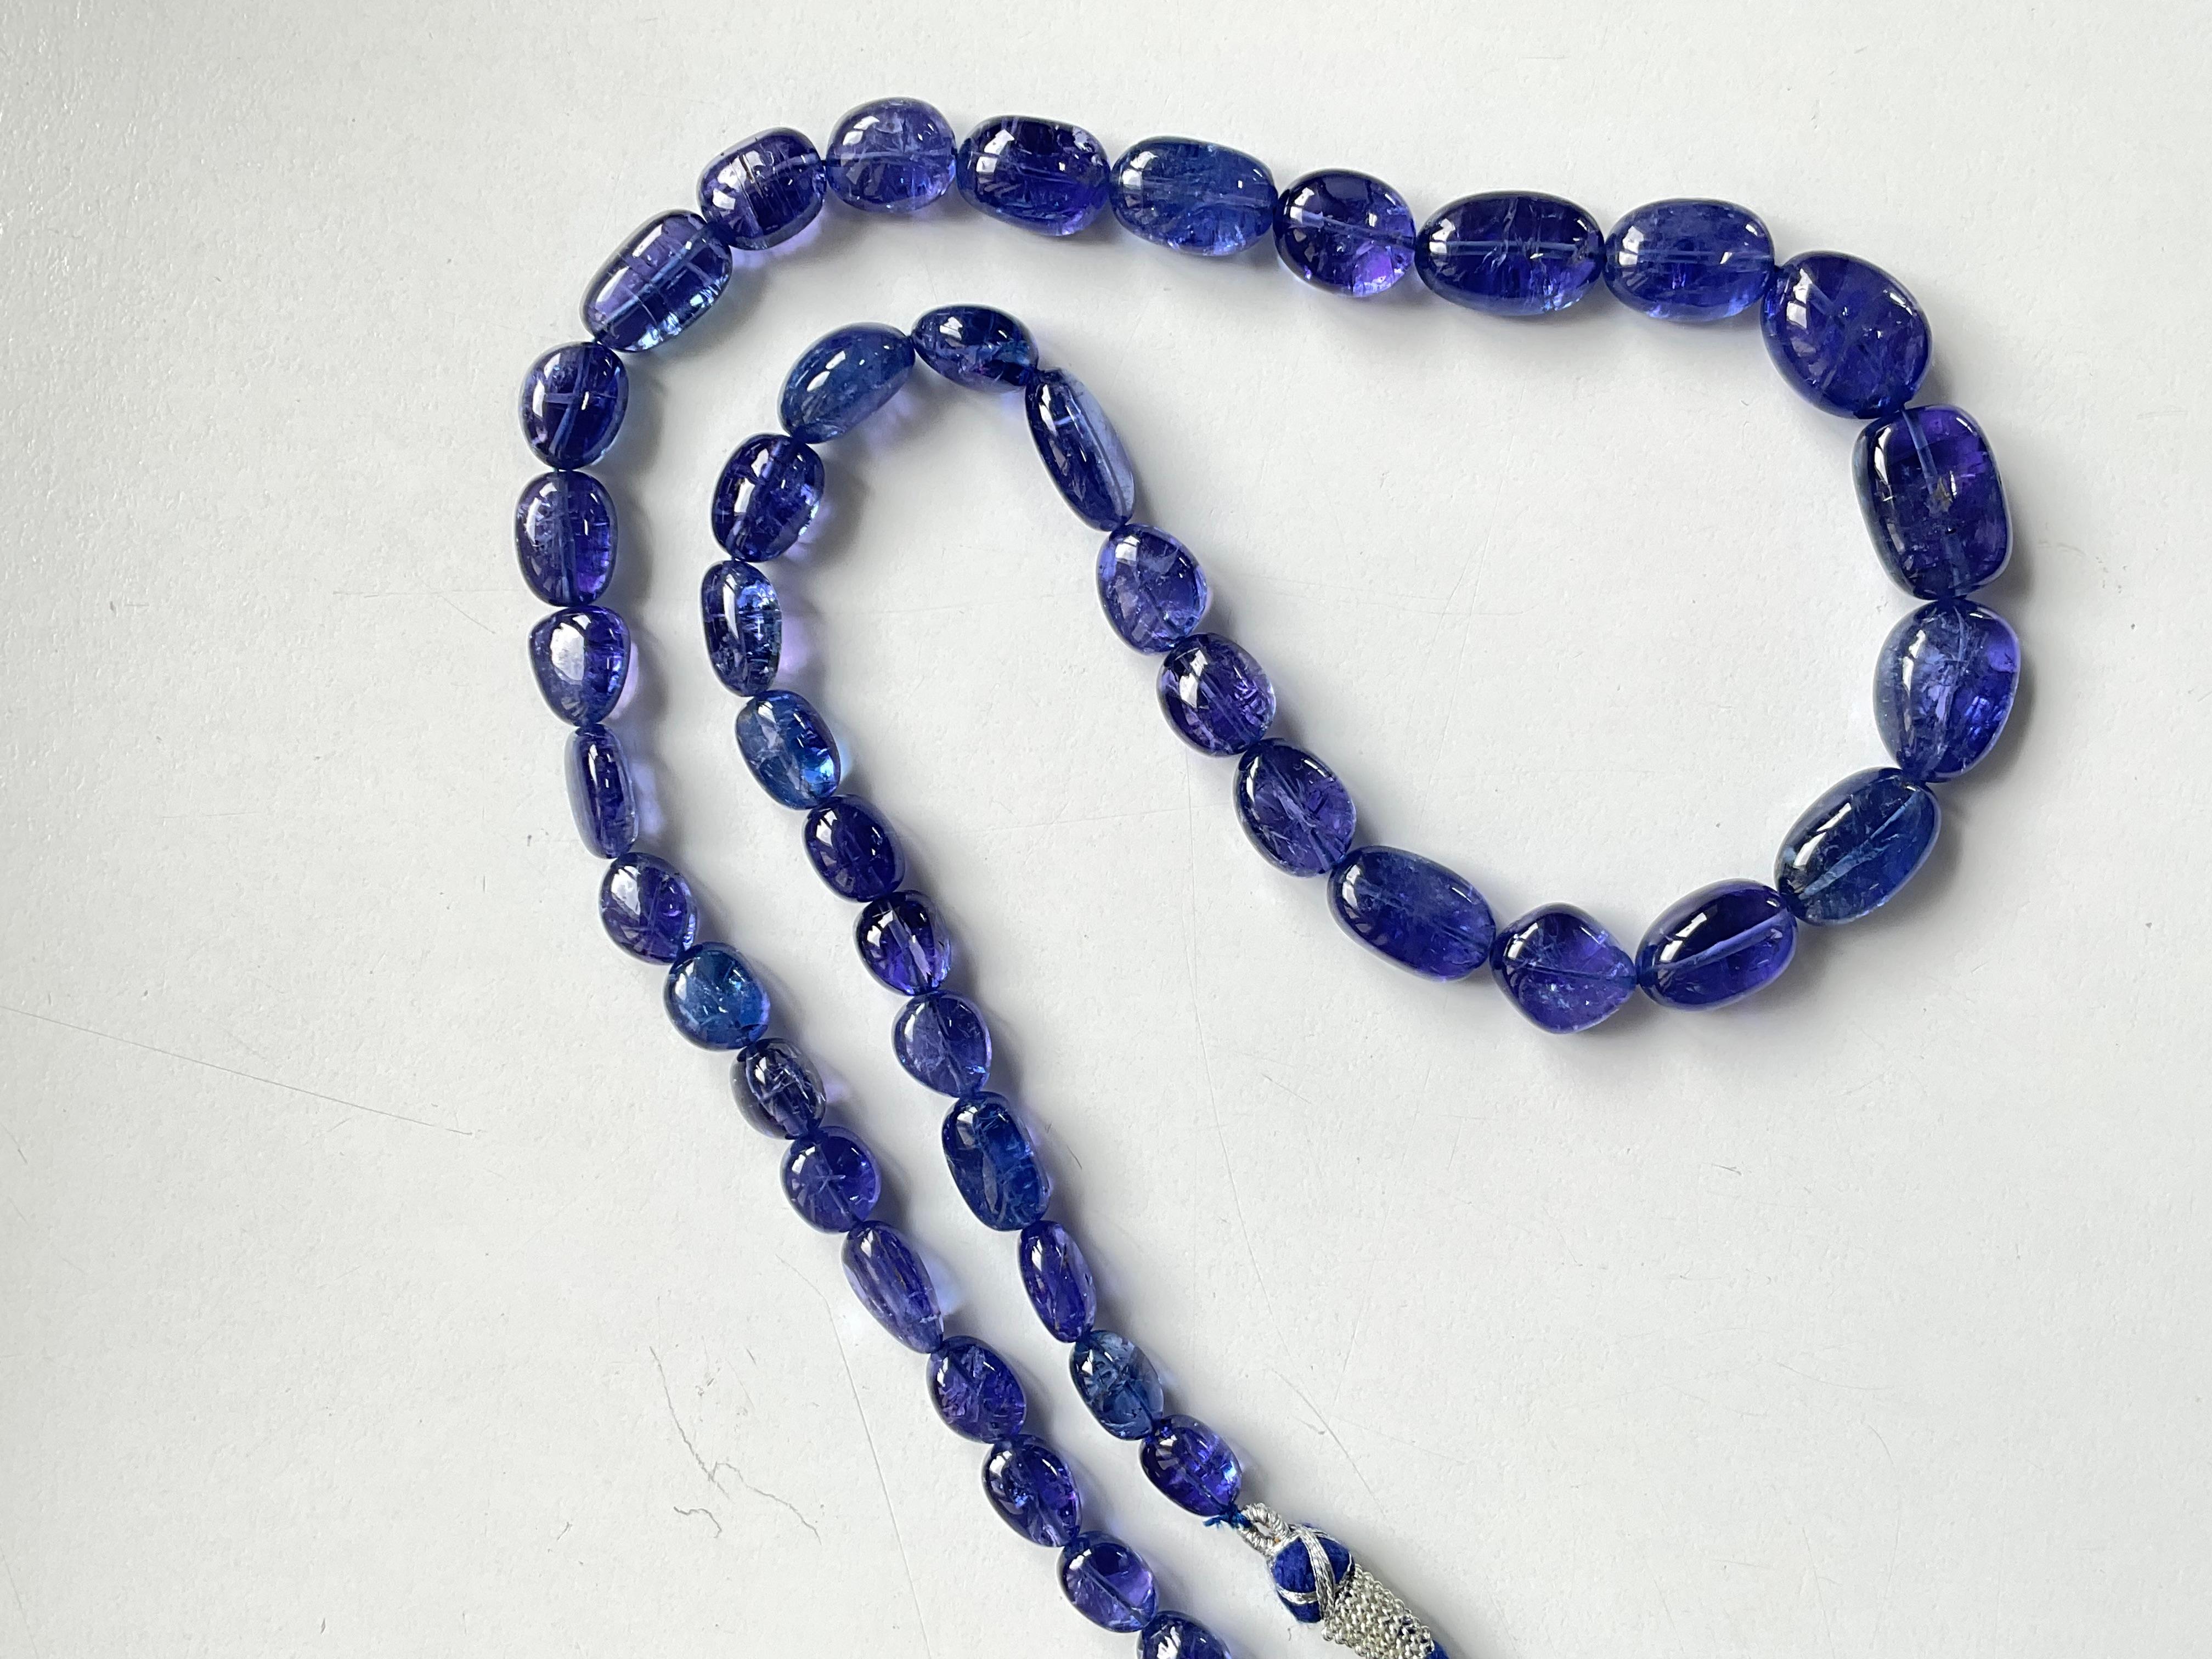 461.15 Carats Tanzanite Top Quality Tumbled necklace Fine Jewelry Natural Gems For Sale 2